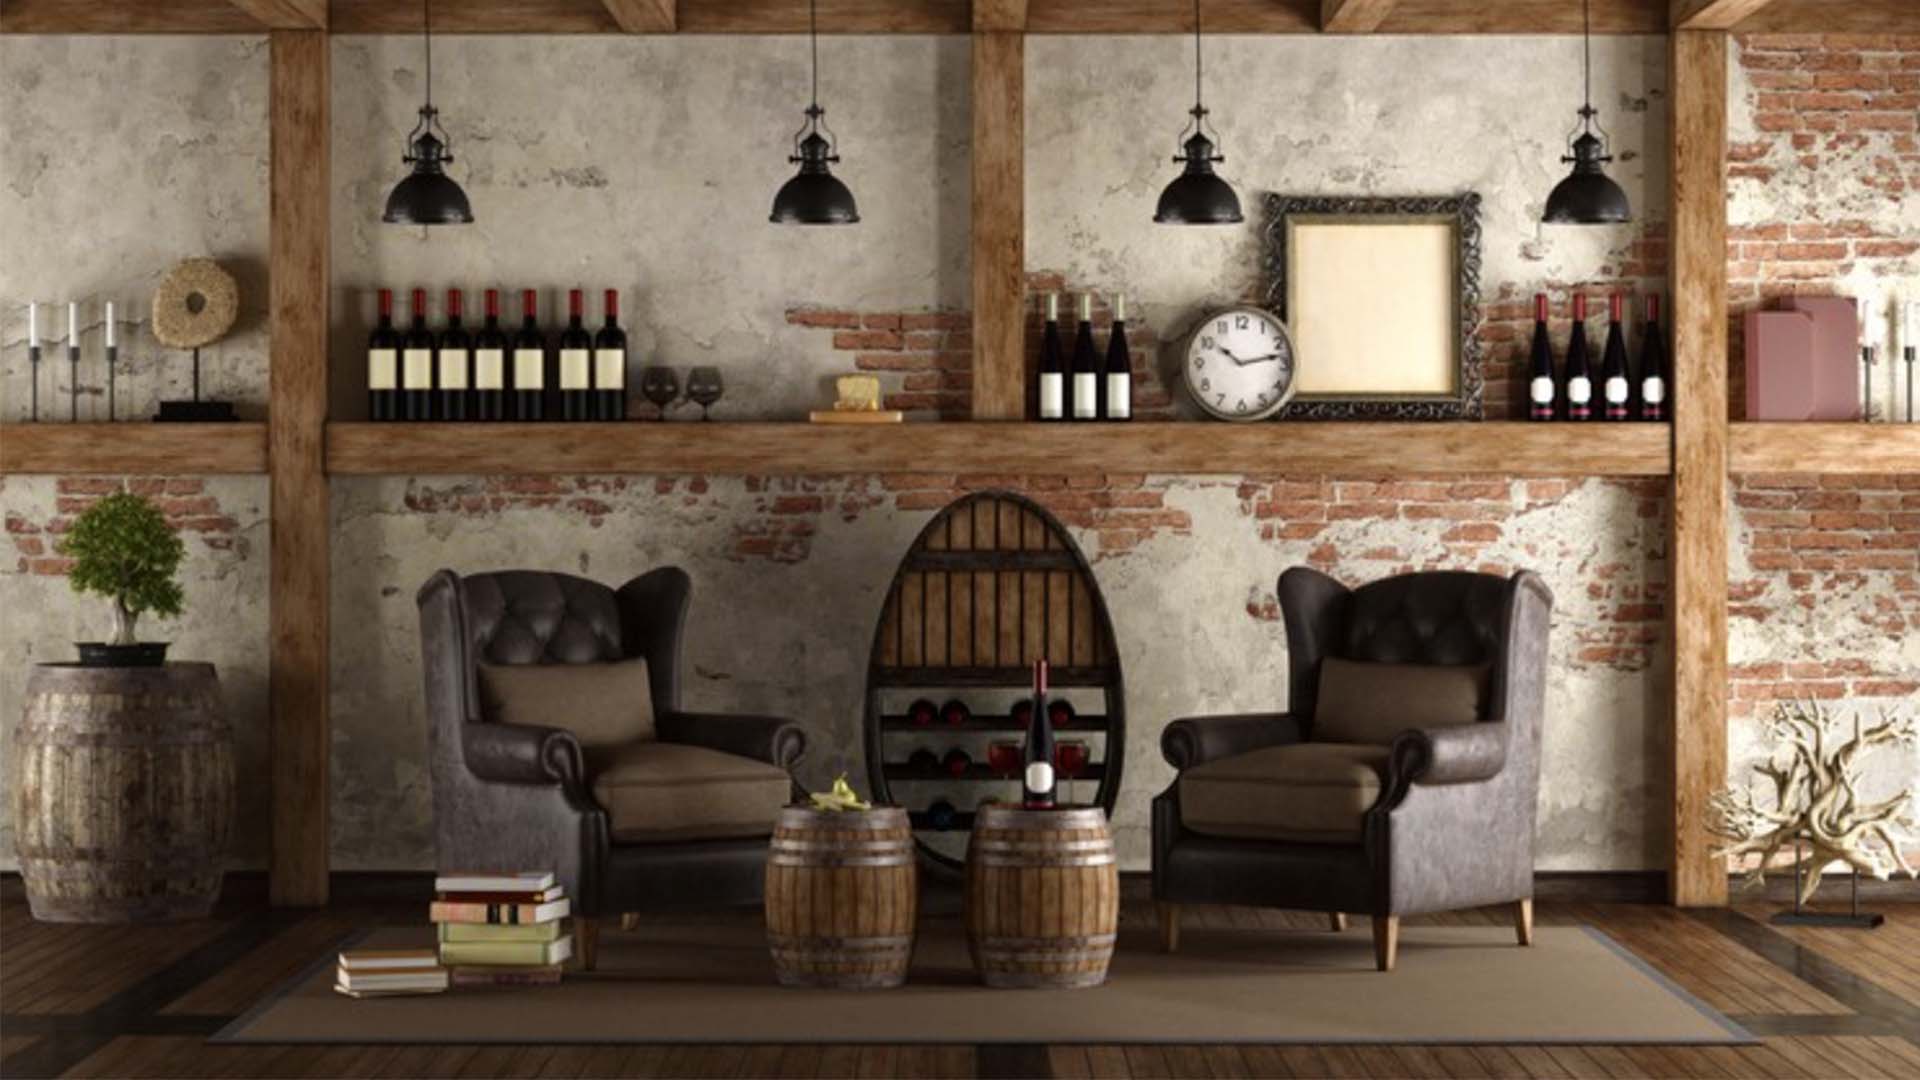 How to Create the Perfect Wine Cellar in Your Home